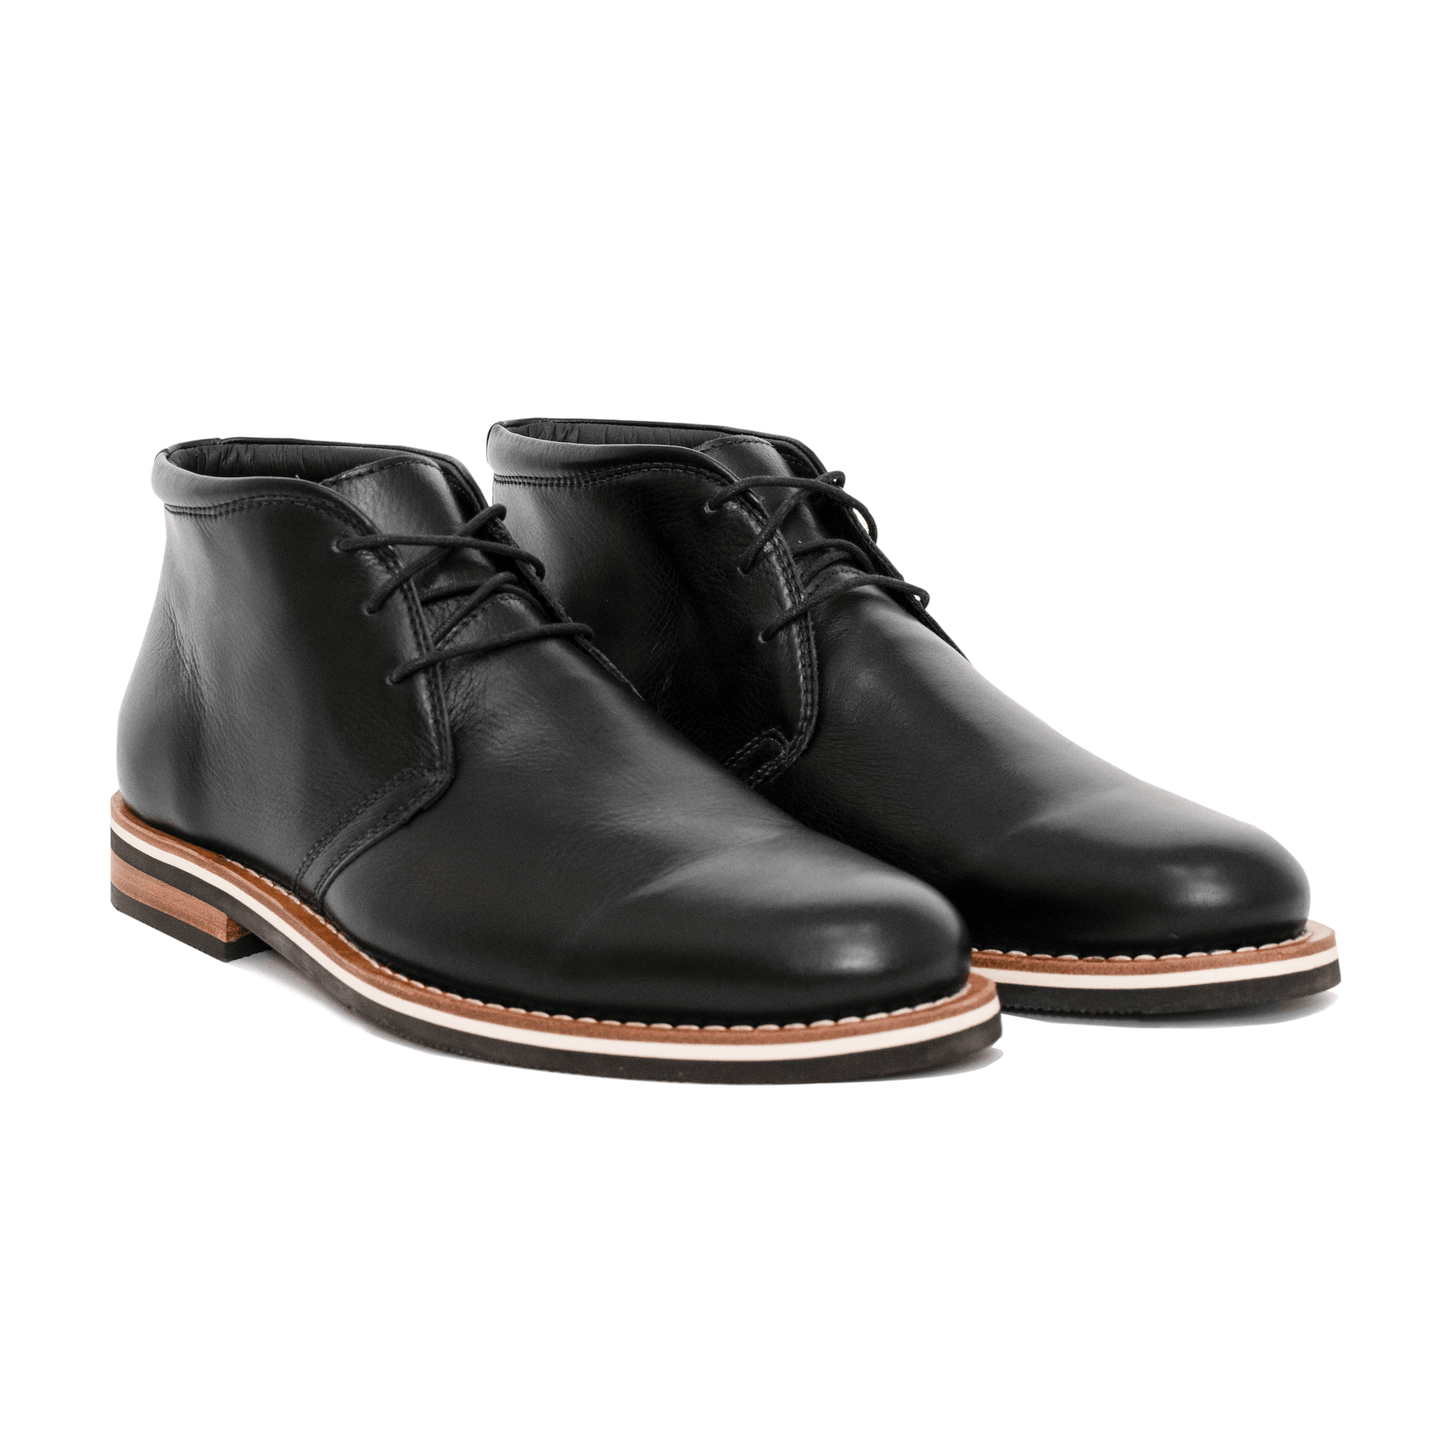 HELM Boots The Hynes Black